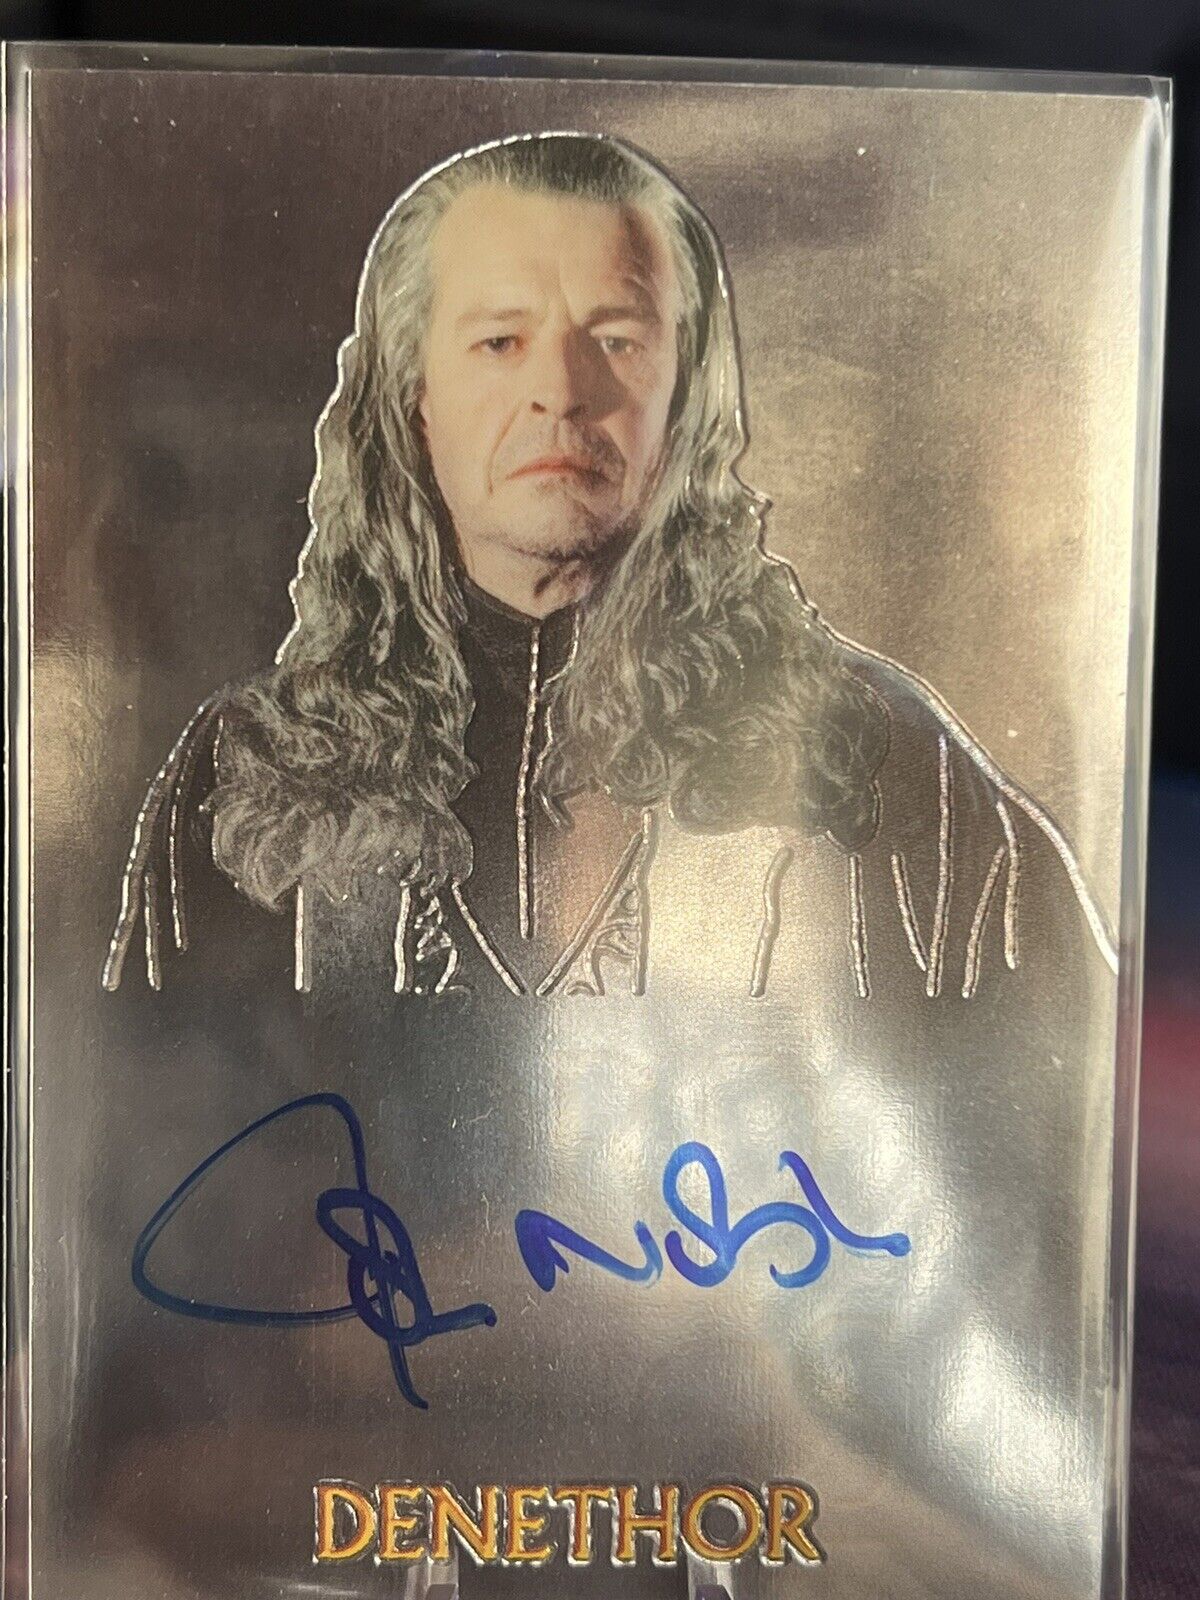 2004 Topps Chrome The Lord of Rings Trilogy John Noble Denethor as Auto 10a3